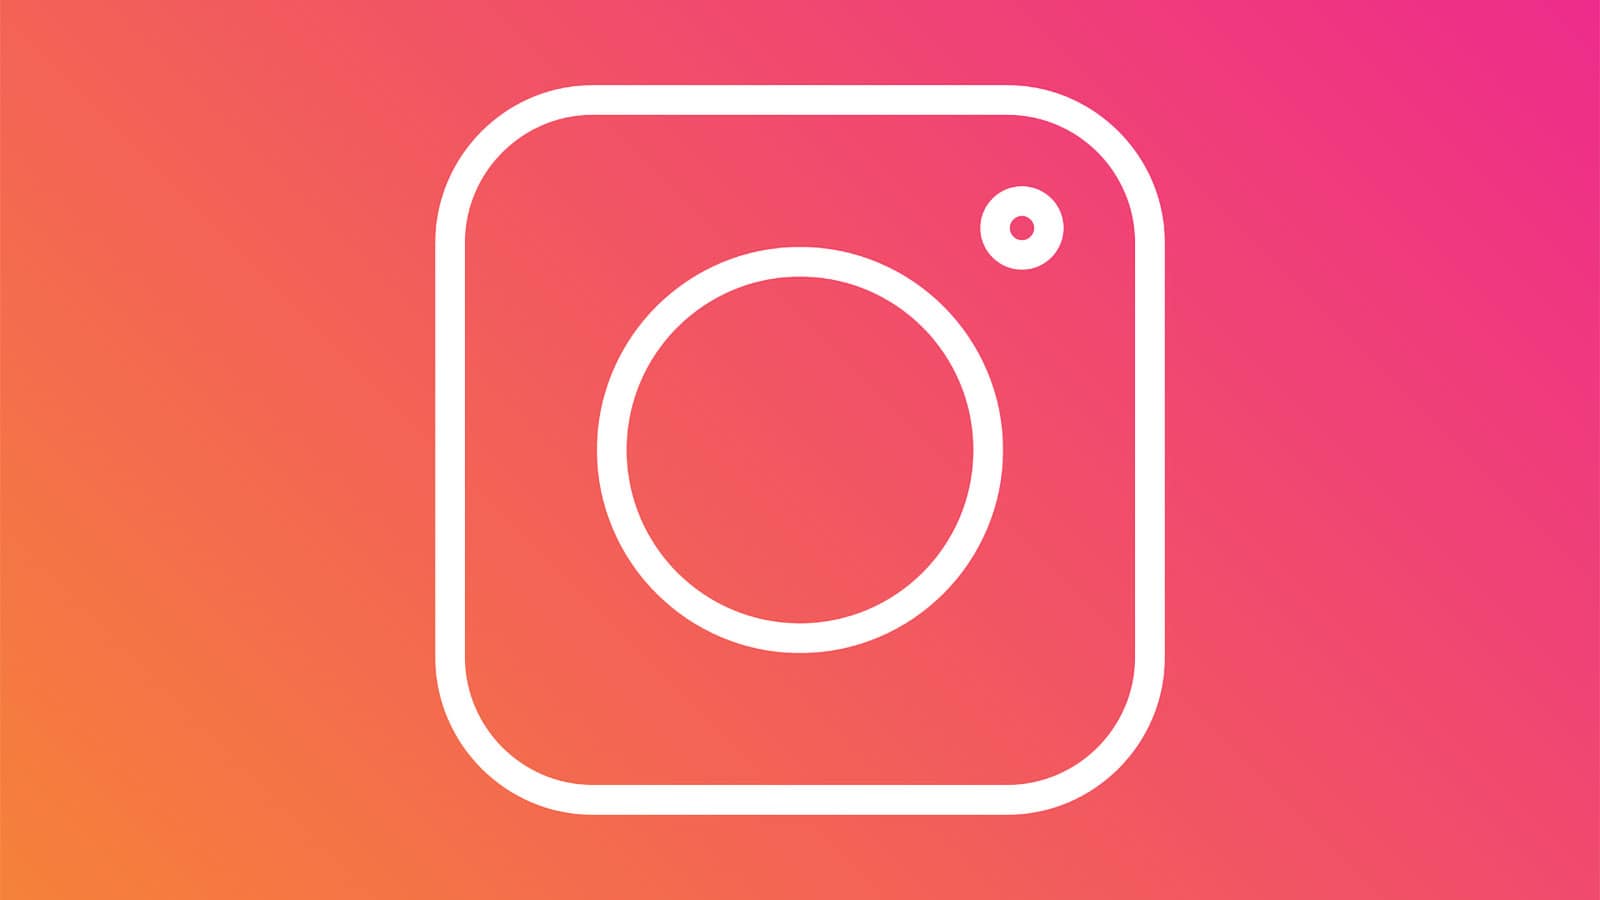 Does My Business Need to Be on Instagram?